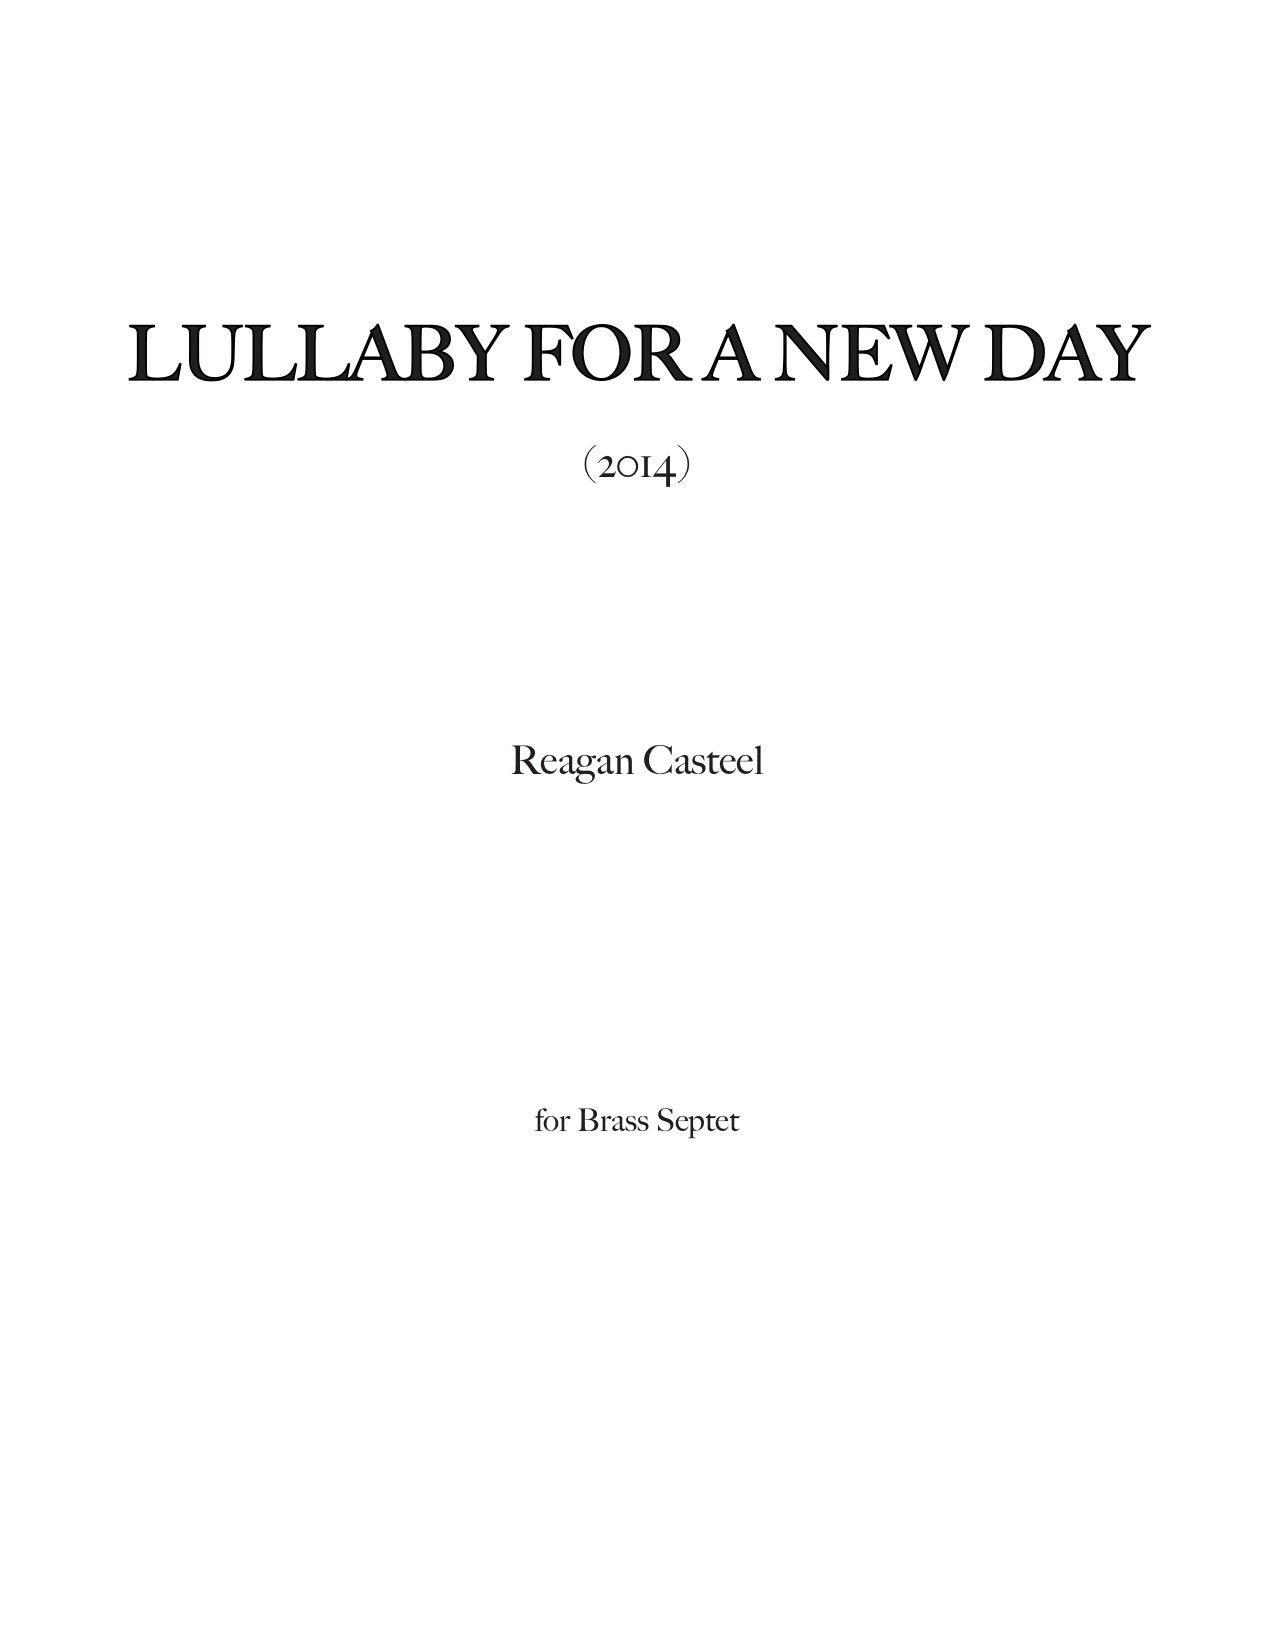 Lullaby for a New Day Full Score and Parts copy (dragged).jpg